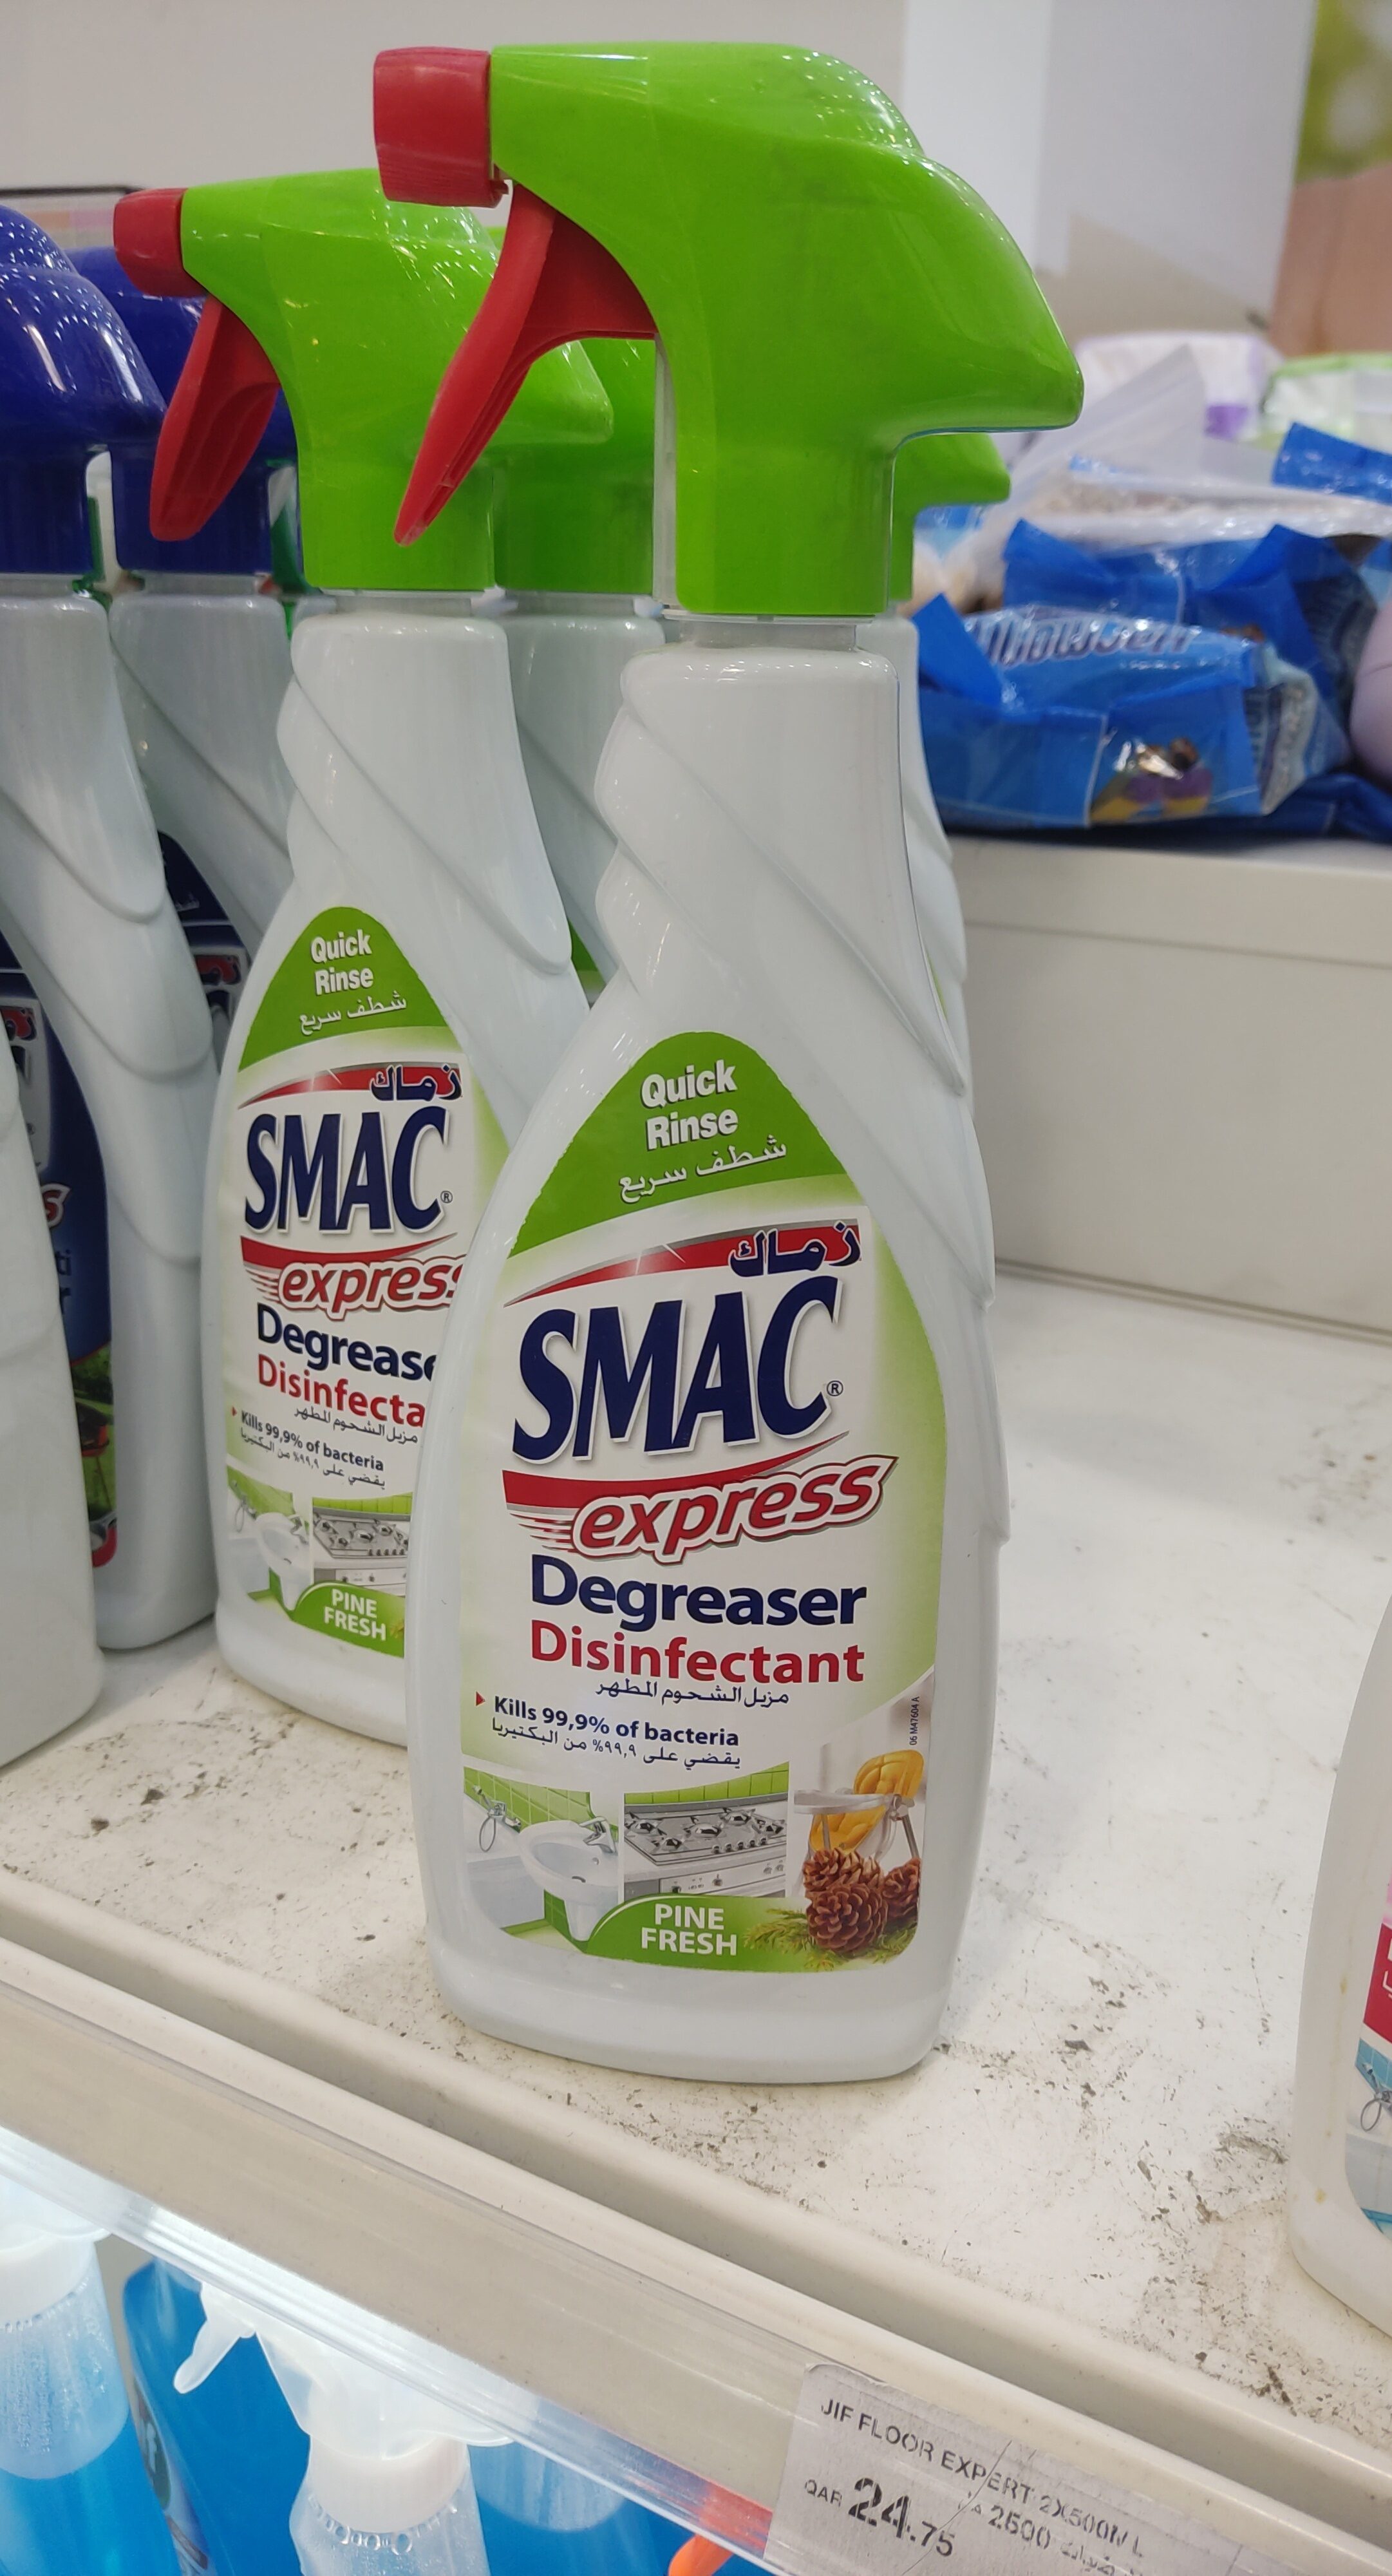 SMAC DEGREASER DIFINFECTANT - Product - en